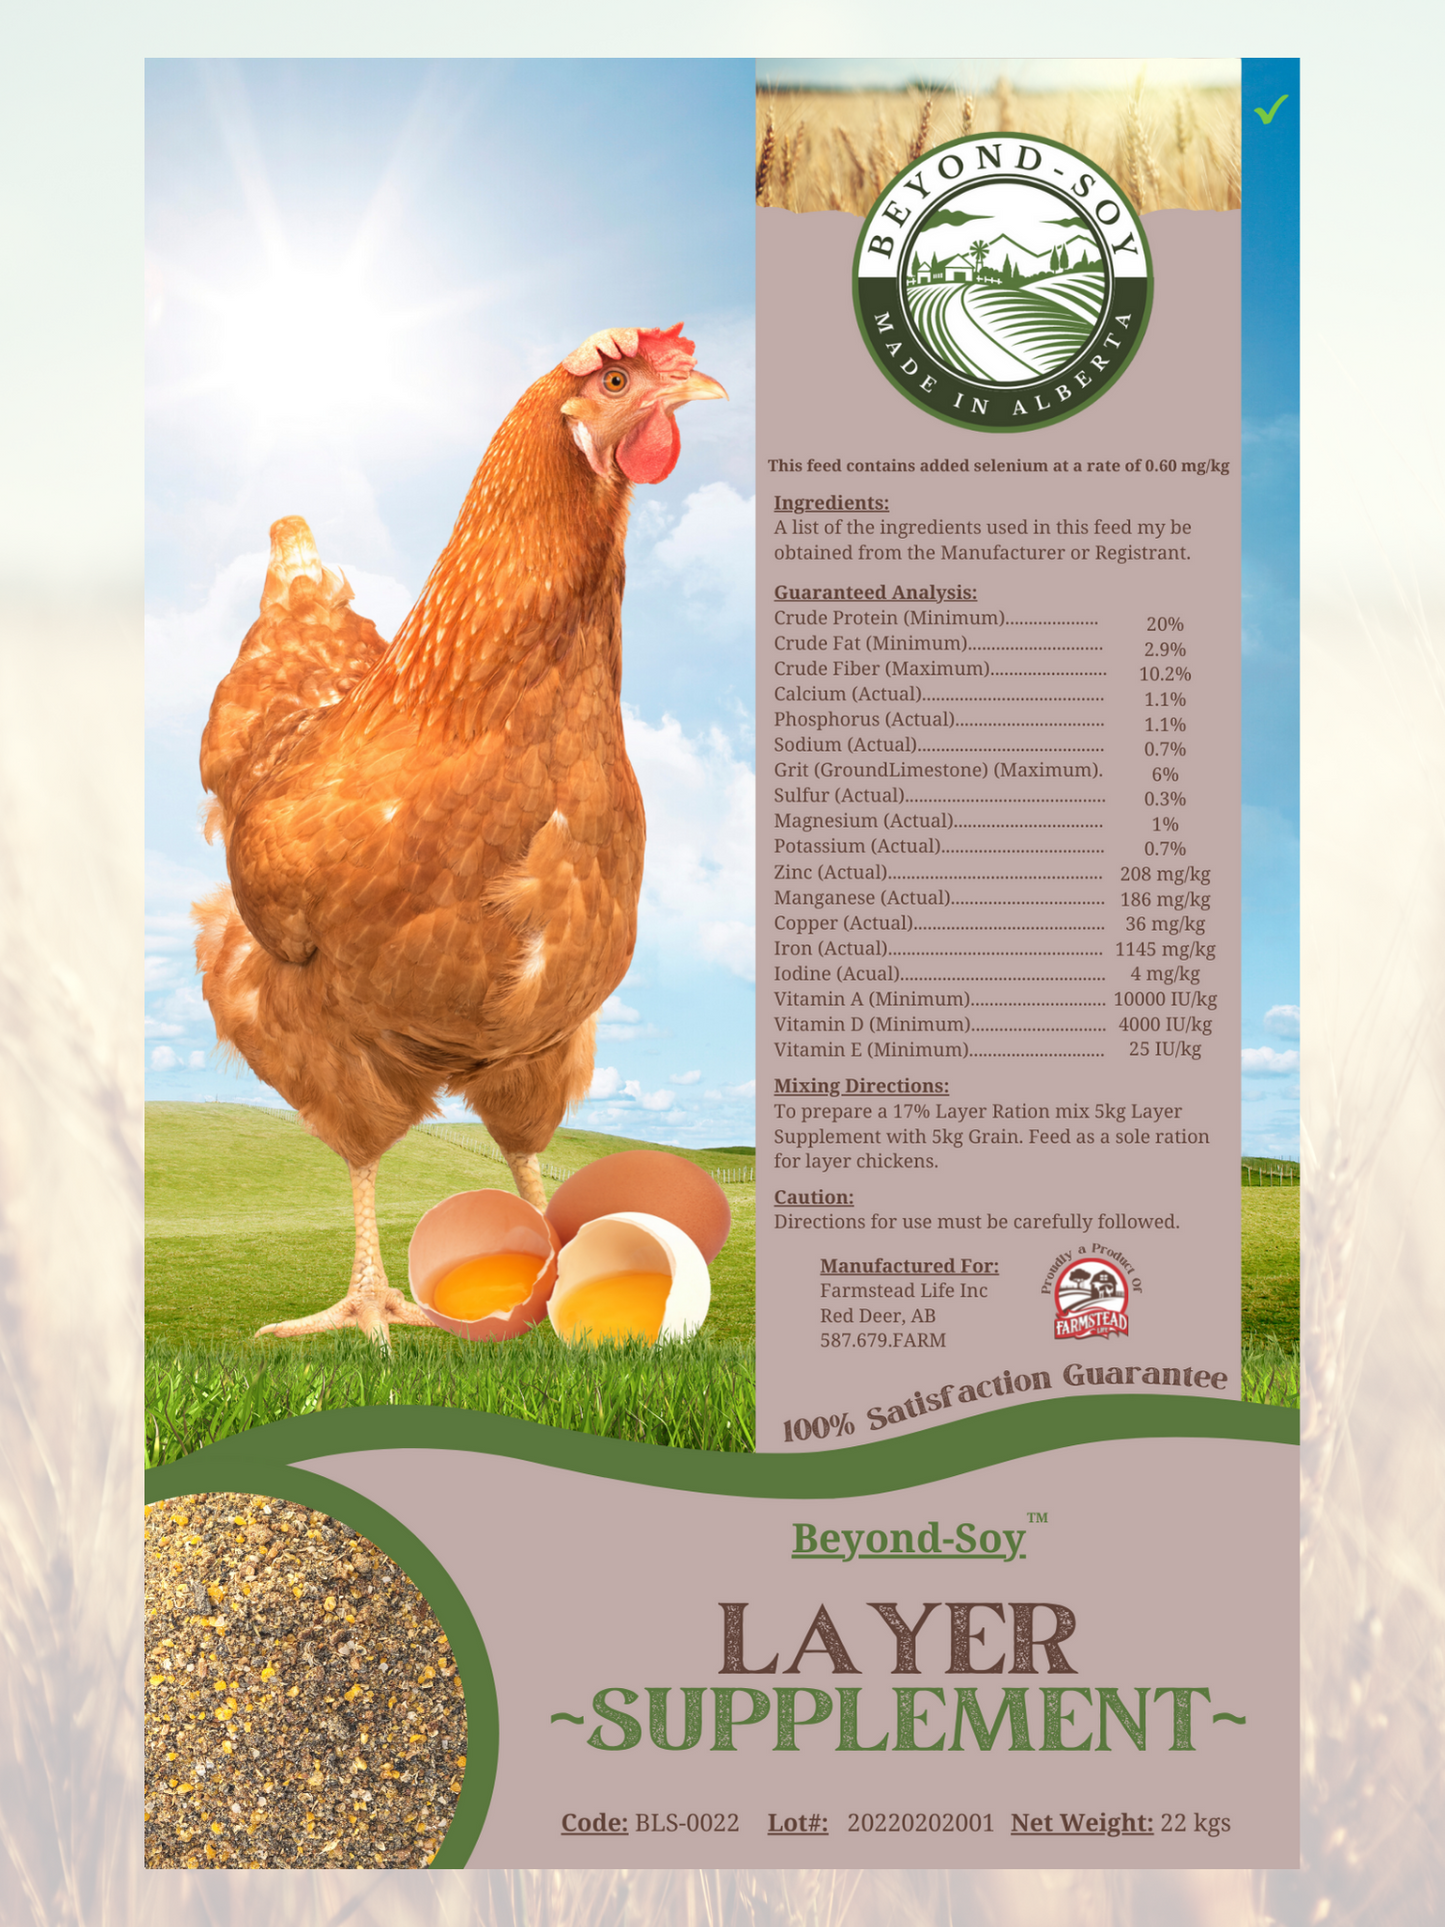 Layer Supplement - Beyond Soy - Farmstead Feeds